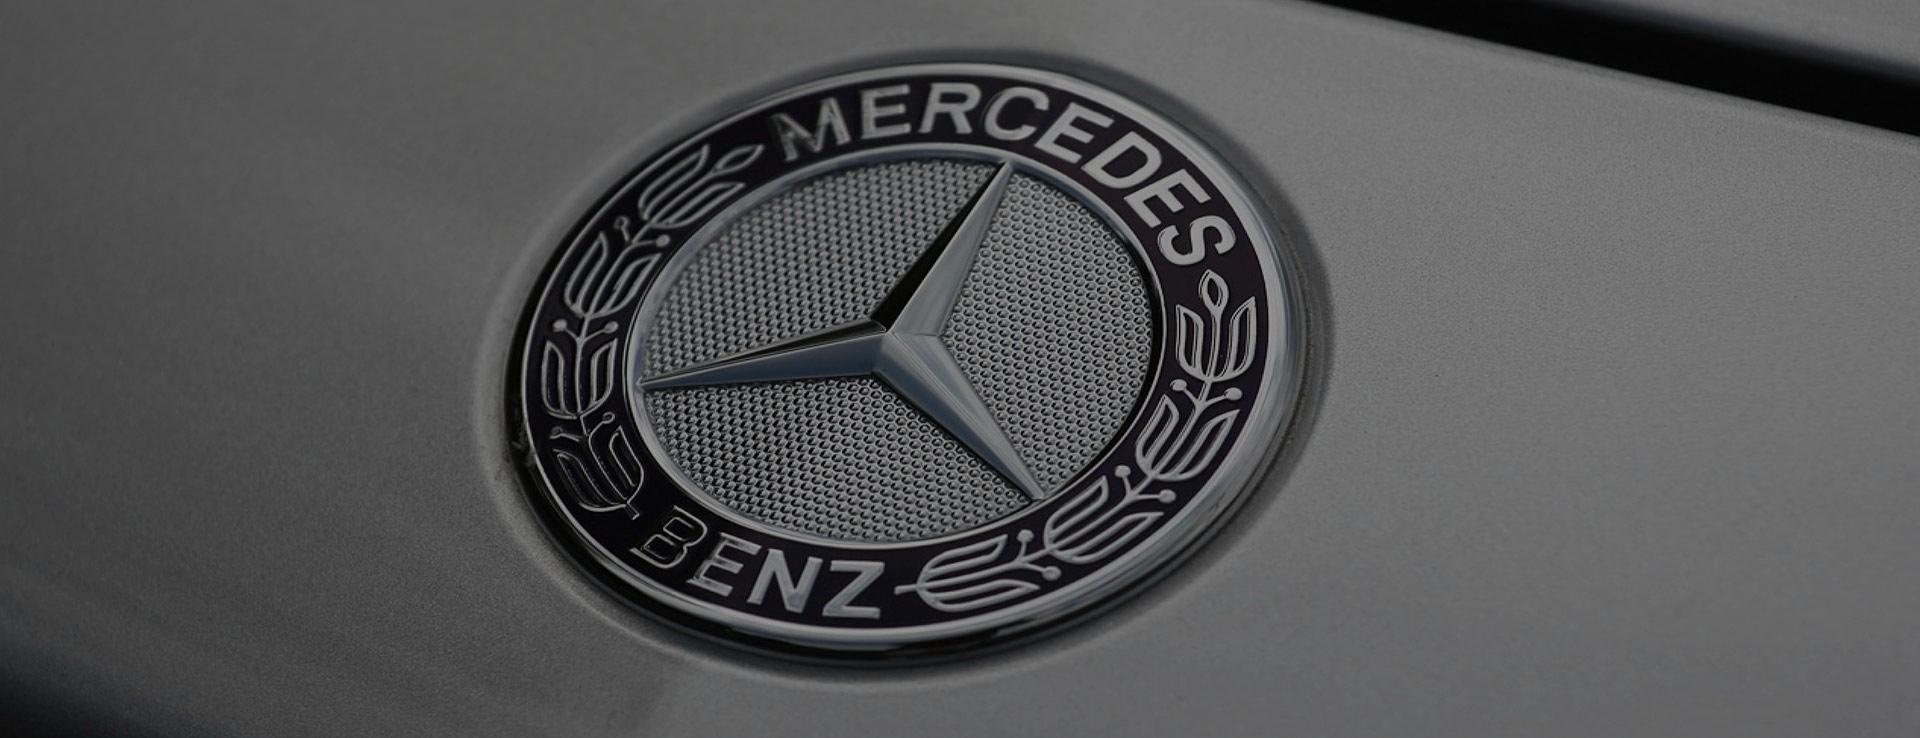 Mercedes Service: What You Need To Know